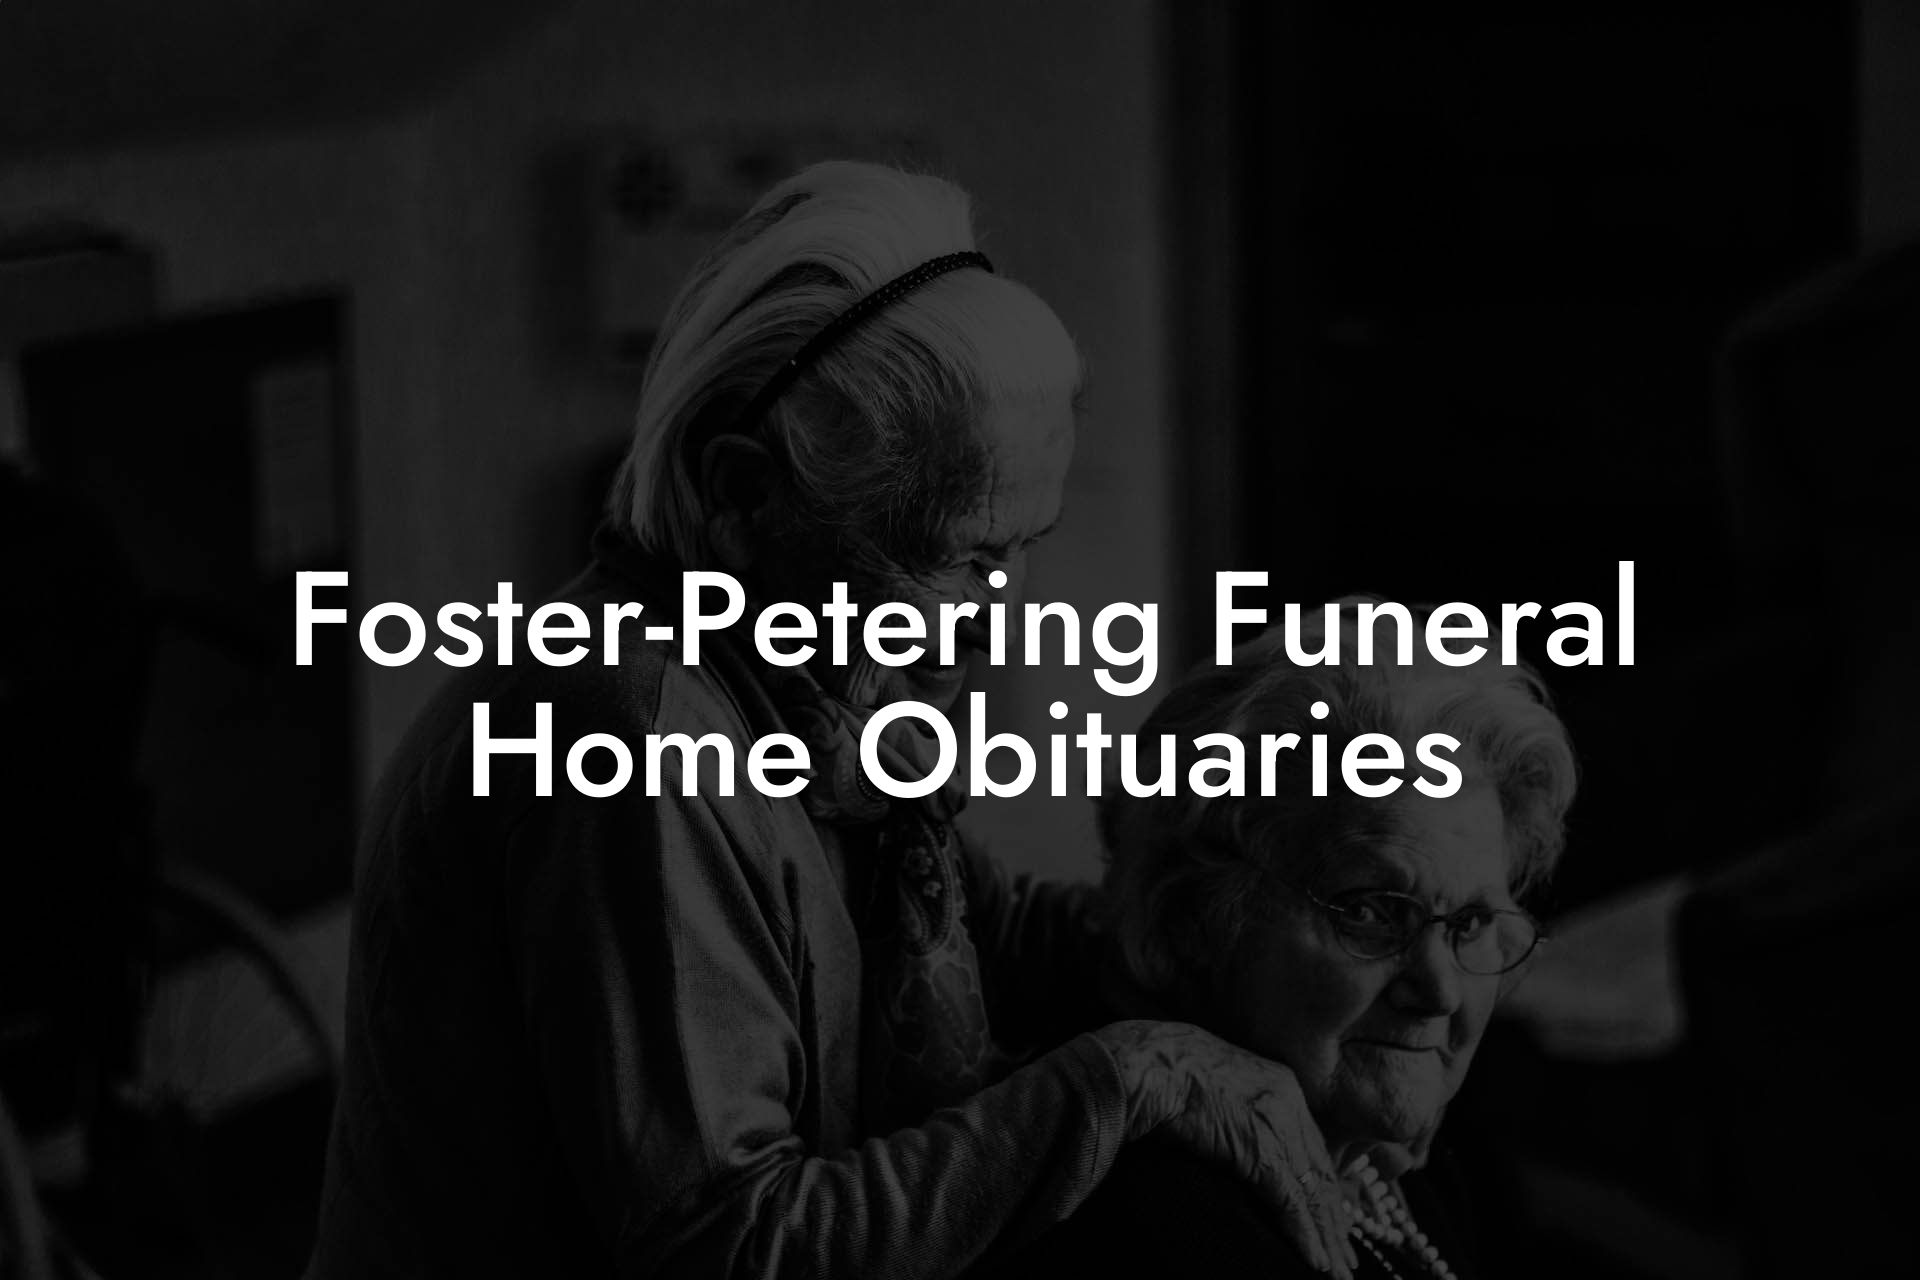 Foster-Petering Funeral Home Obituaries